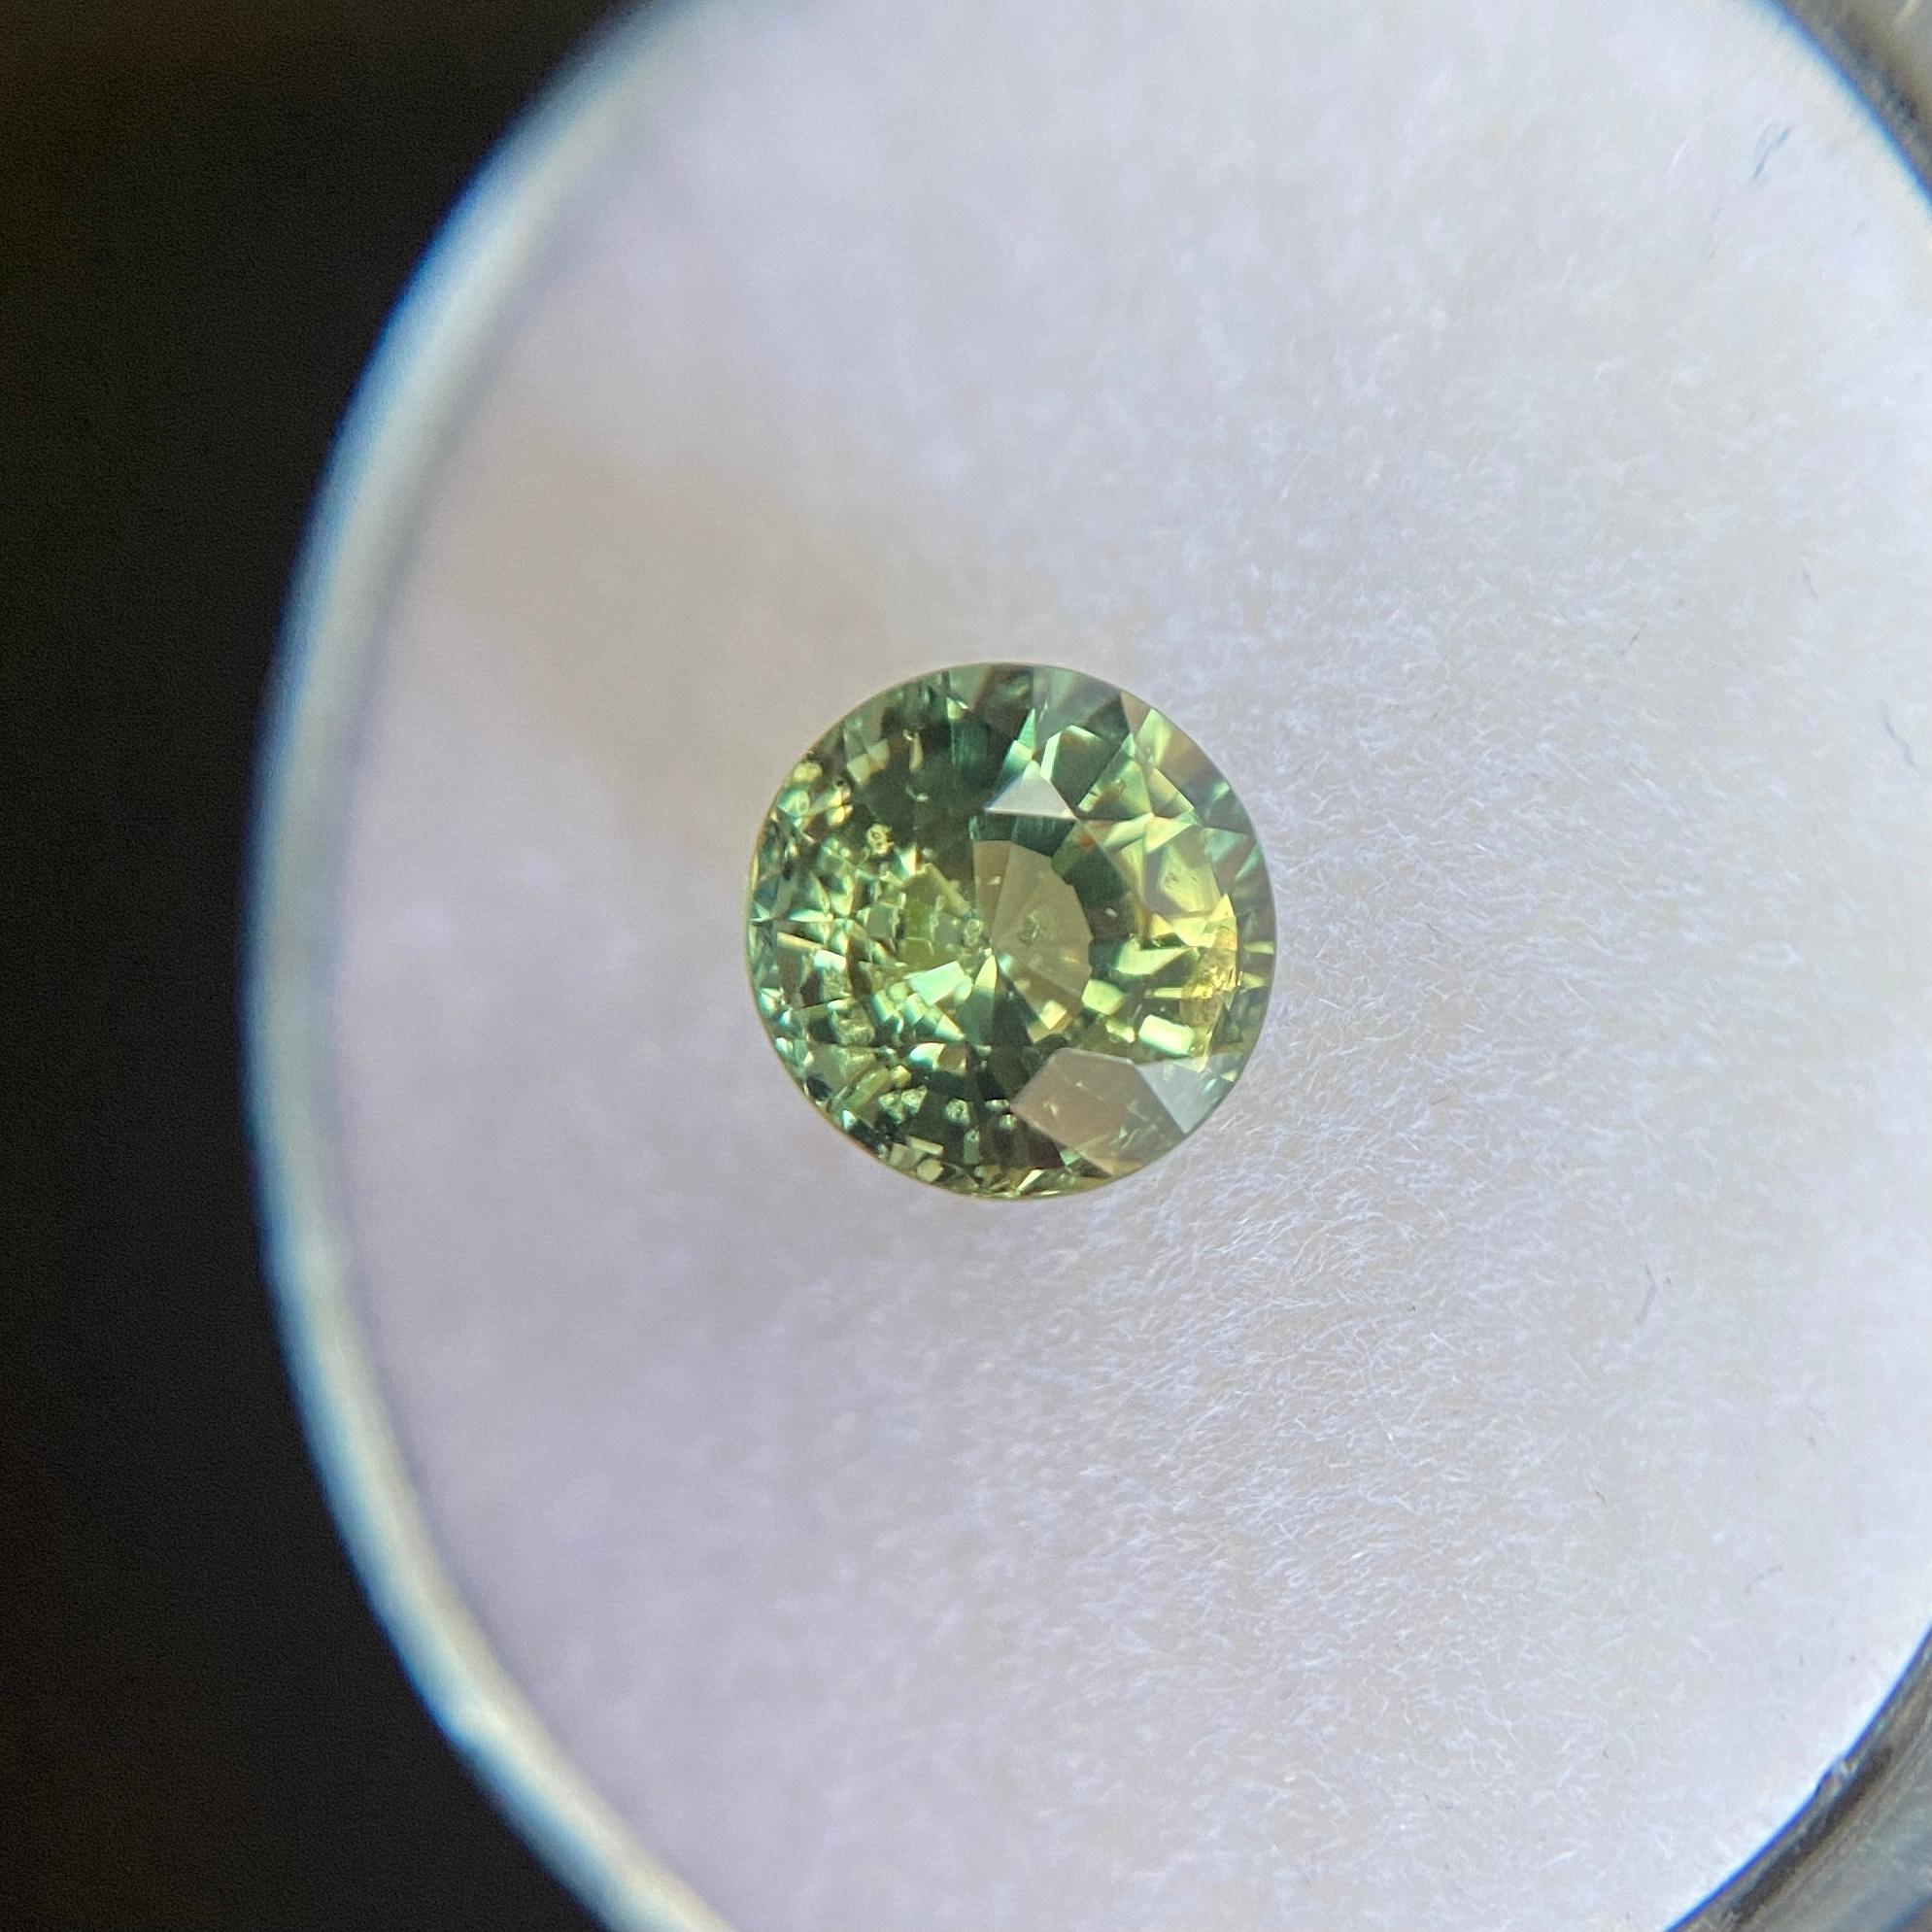 GIA Certified 1.36ct Untreated Vivid Green Yellow Sapphire Round Diamond Cut Gem For Sale 2